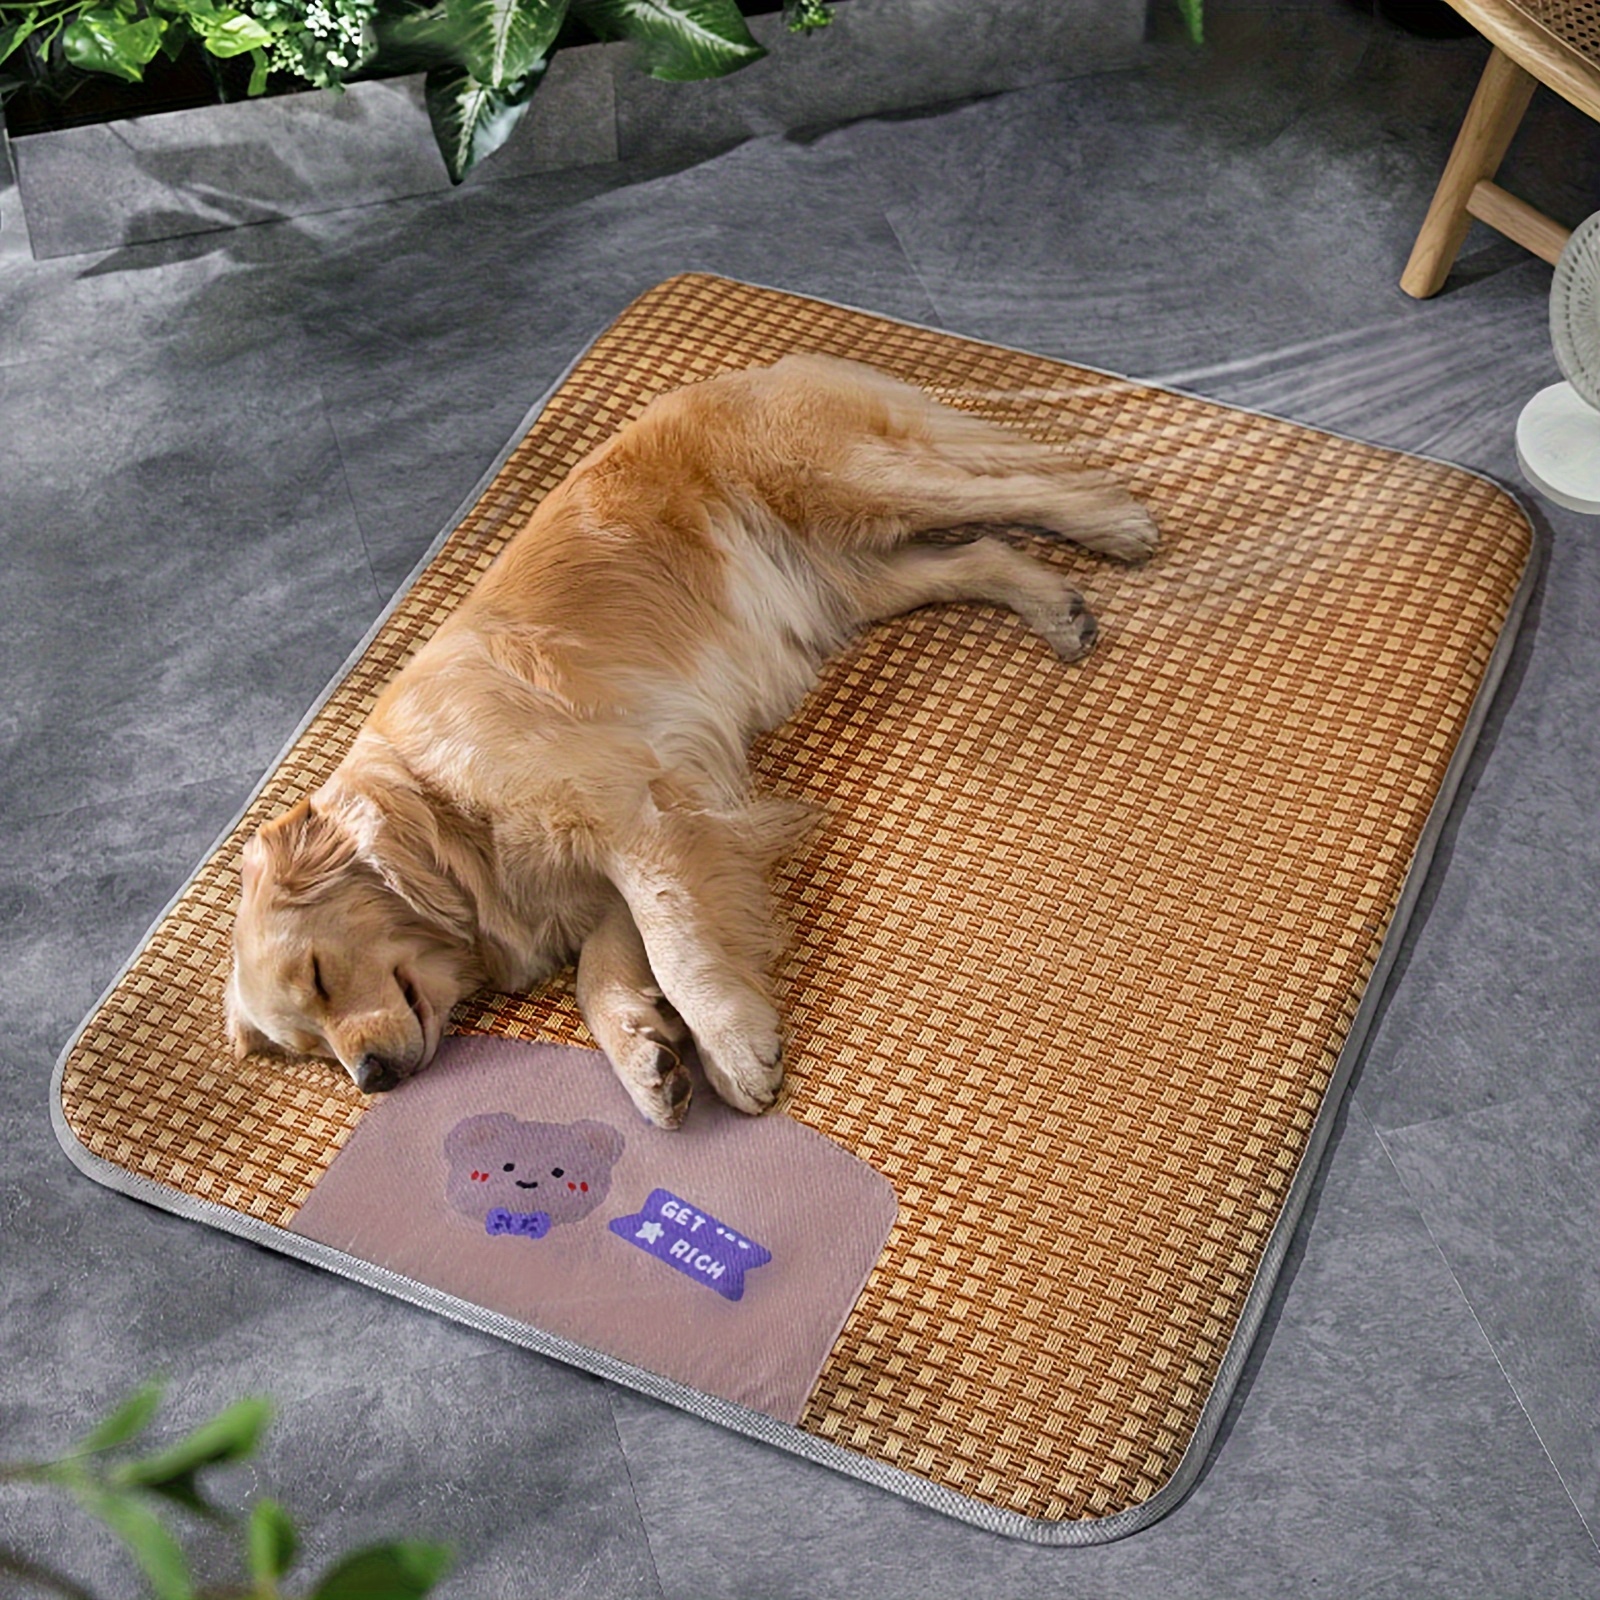 

Metabest Cooling Pet Mat For Dogs & Cats - Breathable, Comfortable Summer Pad With Animal Print, Ideal For Small To Medium Breeds